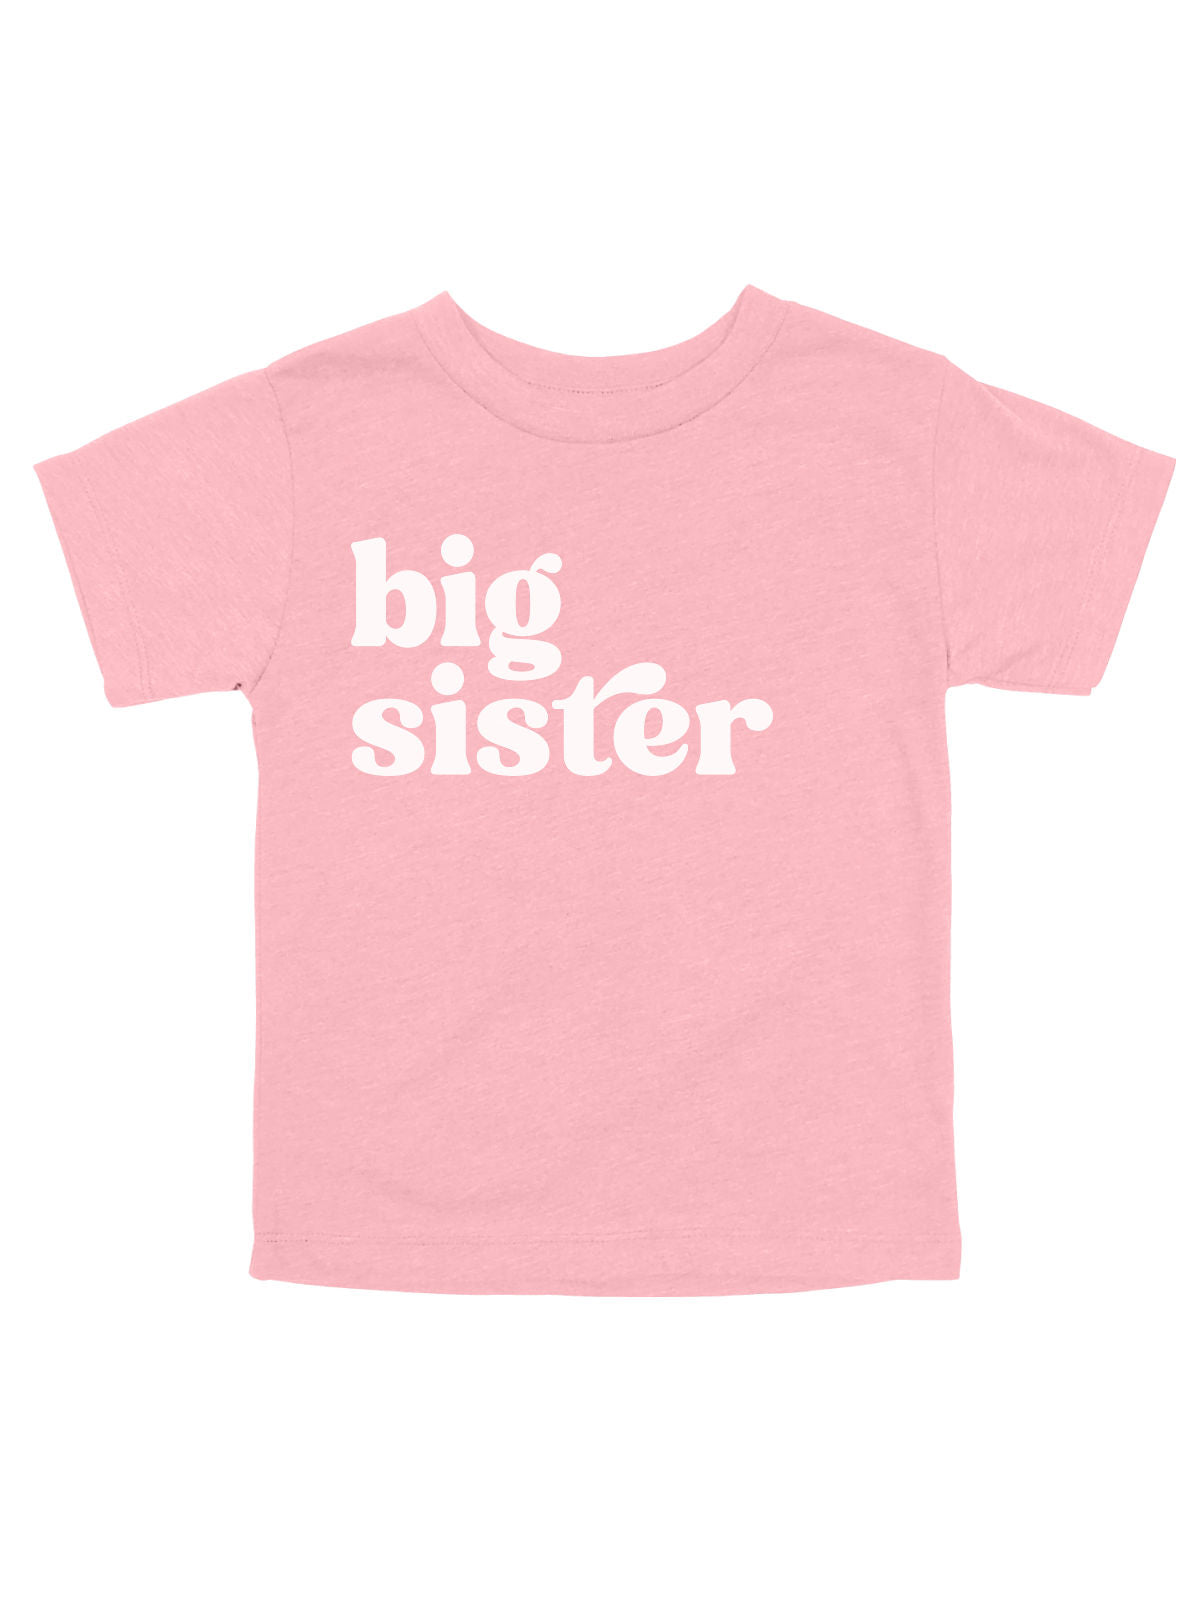 Big Sister Shirt for Girls in Pink